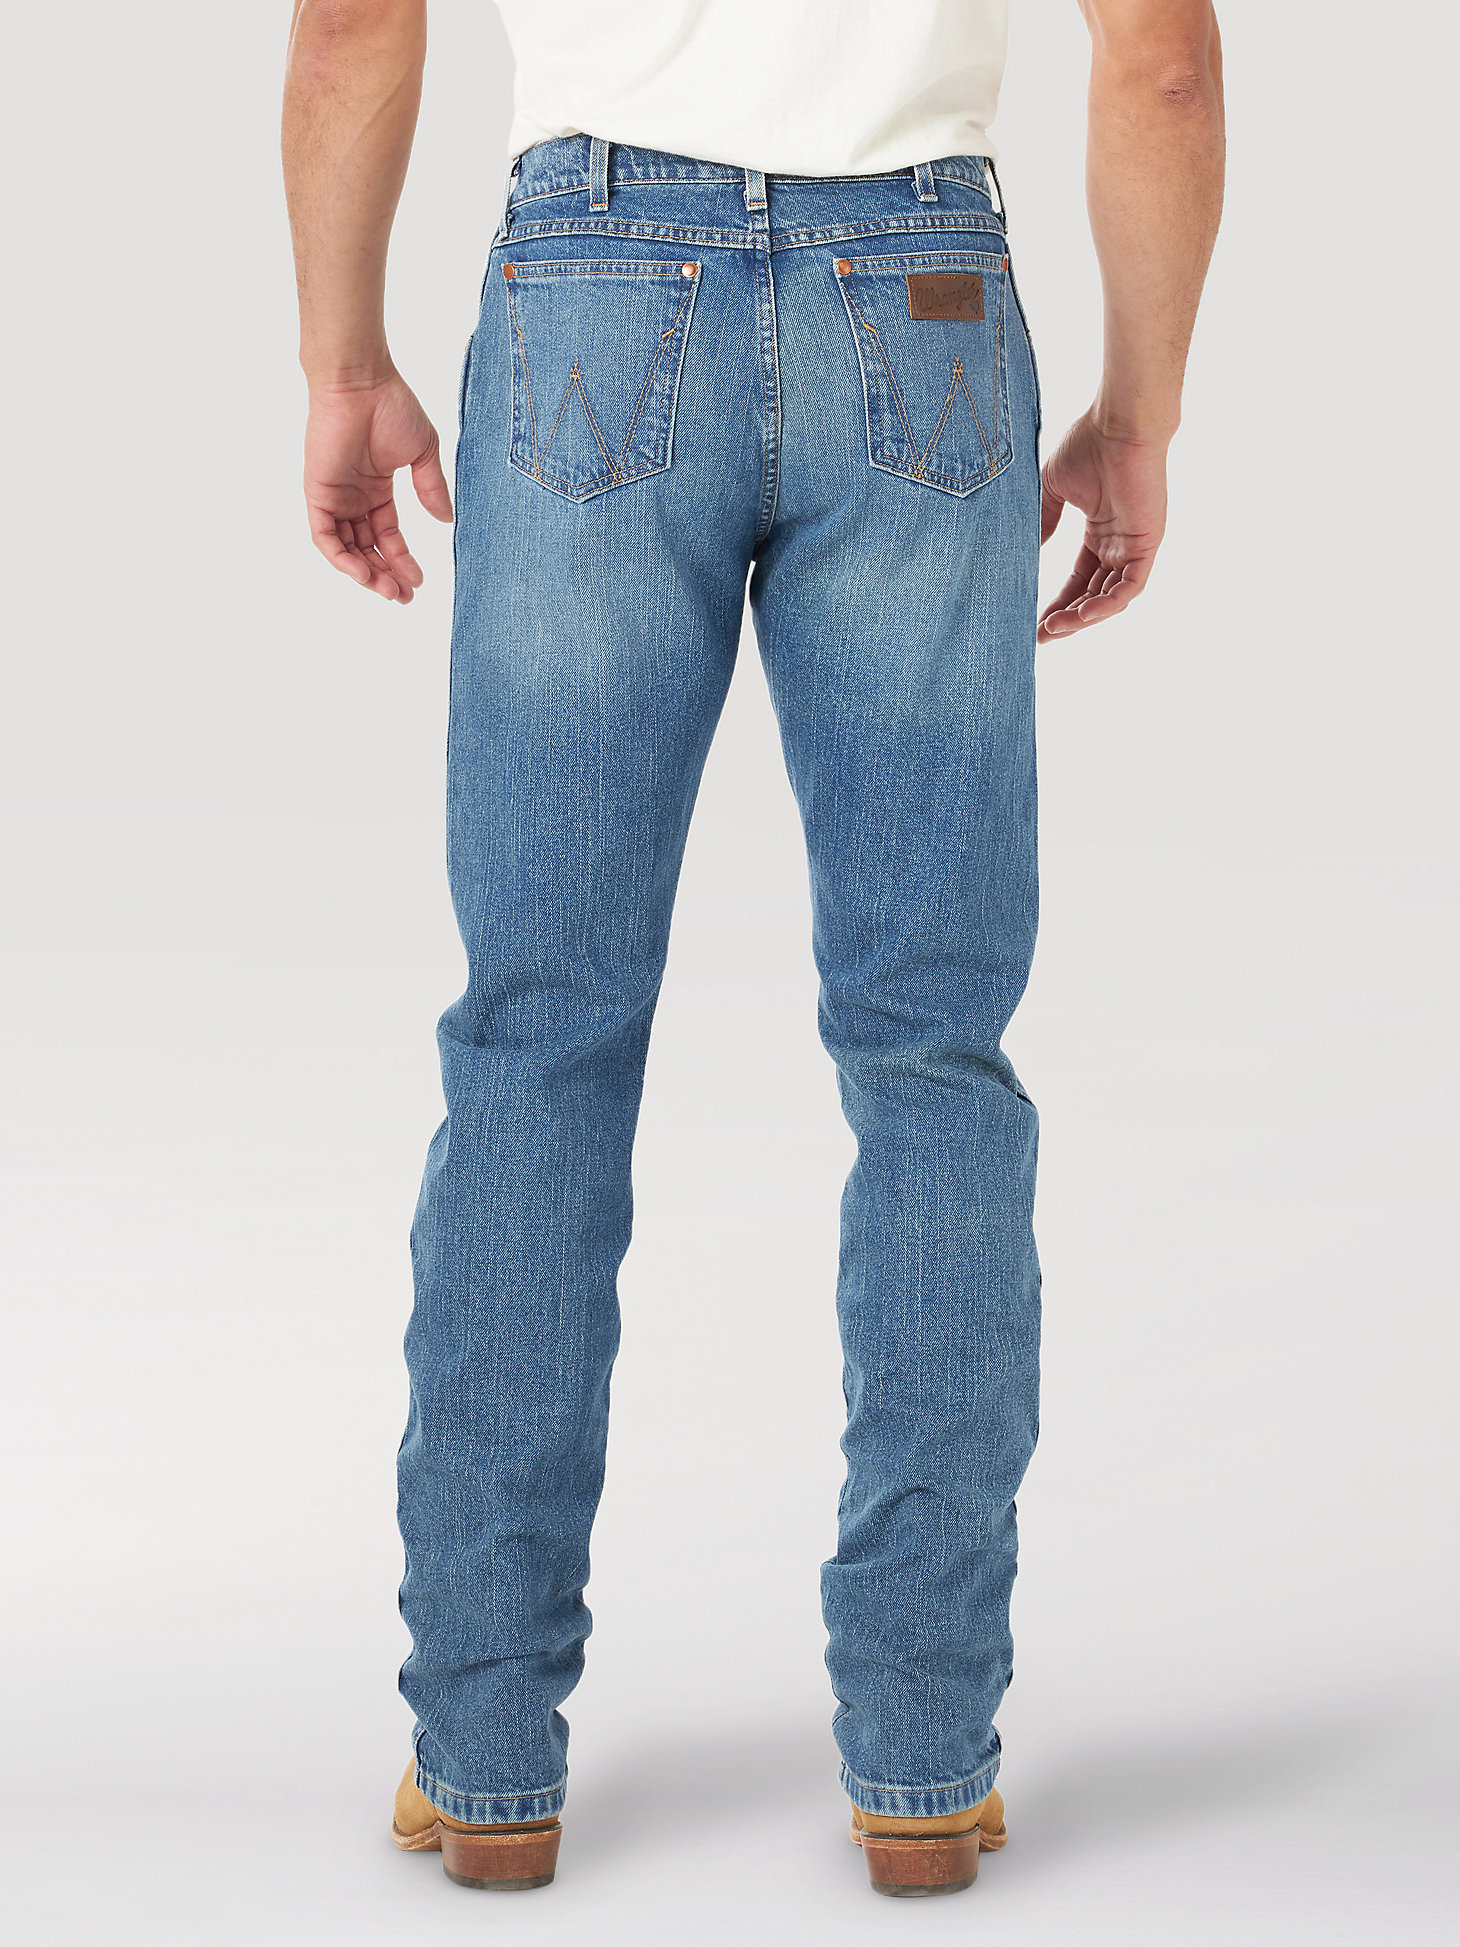 Men's Wrangler Rooted Collection™ Slim Fit Straight Leg Jean with Texas Cotton in Blue alternative view 3